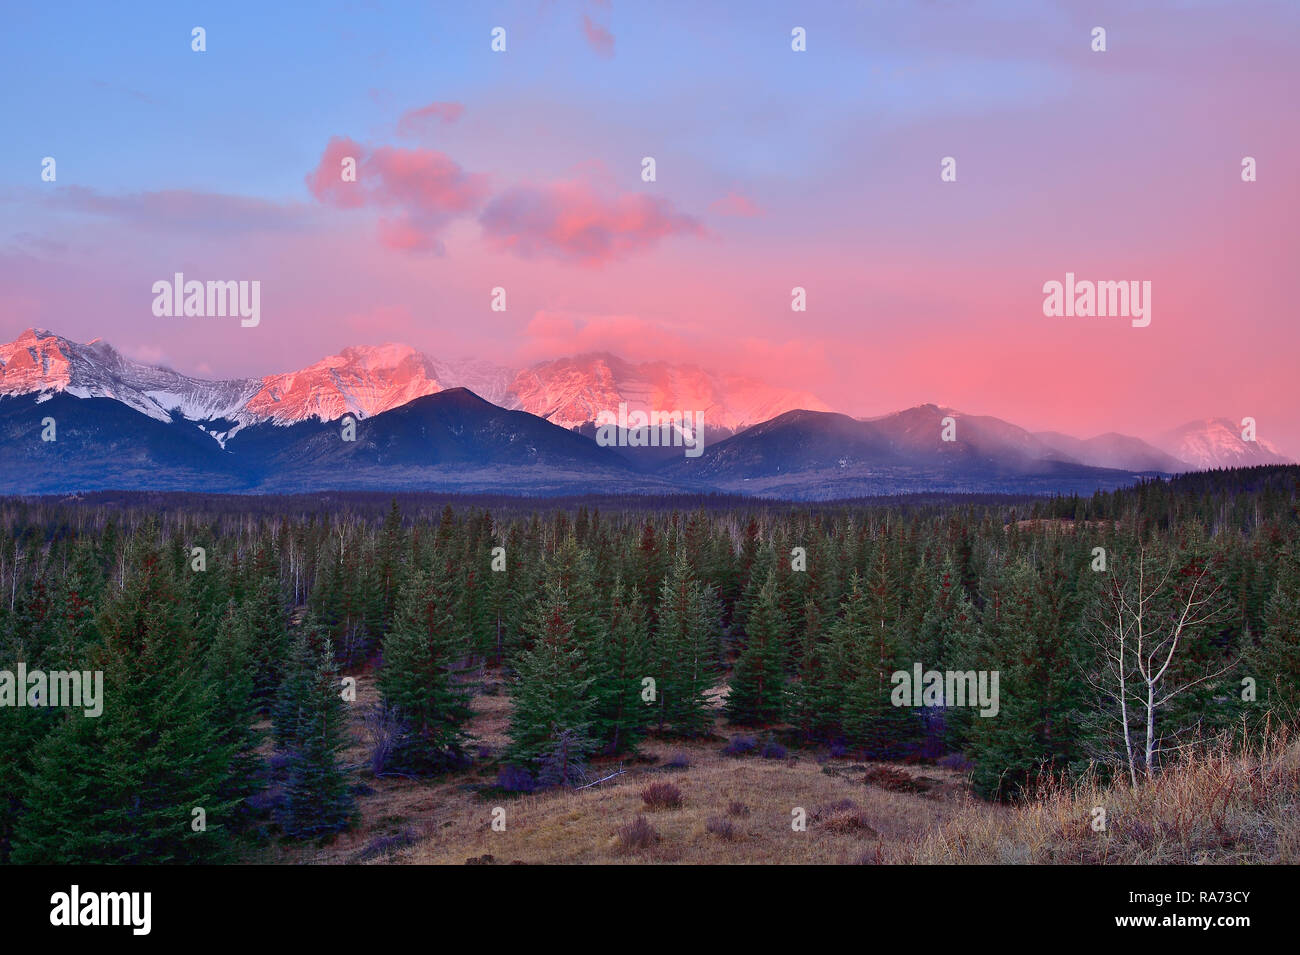 A horizontal landscape view of the Alberta Rocky Mountains in the early morning Alpenglow light near Brule Alberta Canada, Stock Photo